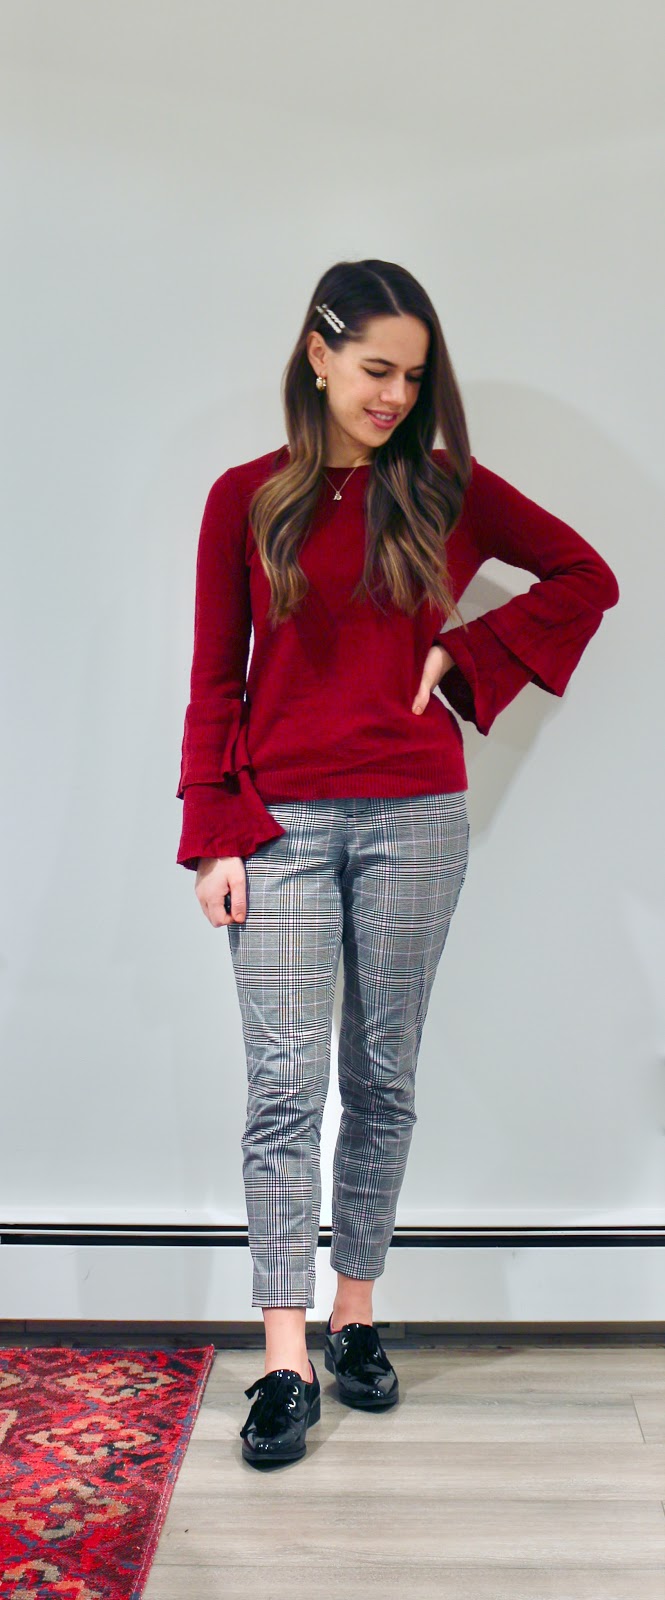 Jules in Flats - Plaid Pixie Ankle Pants with Burgundy Ruffle Sleeve Sweater (Business Casual Winter Workwear on a Budget